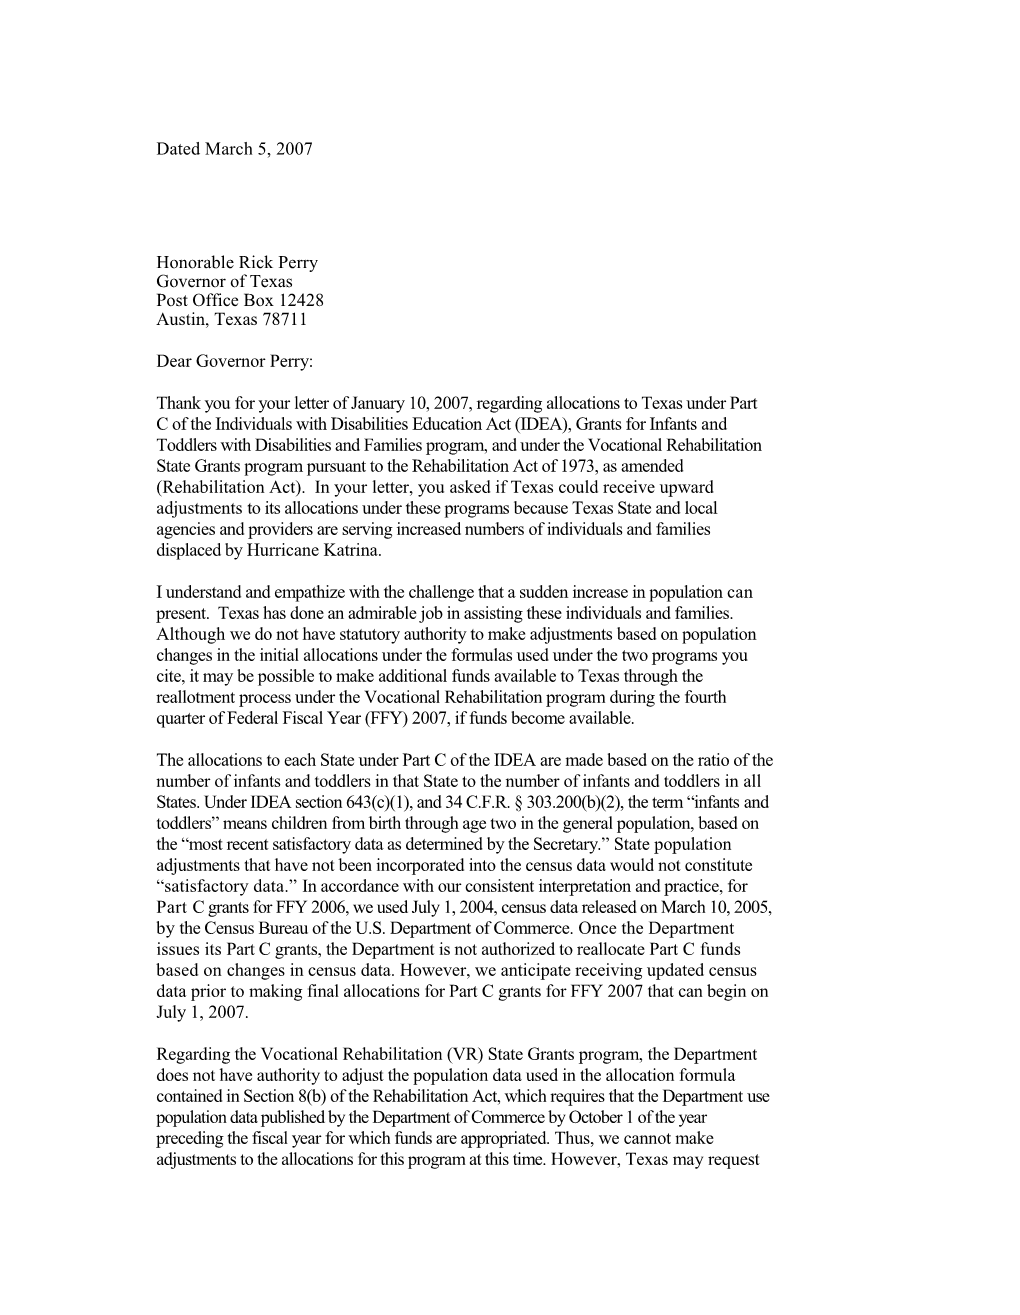 Letter Dated 3/5/07 to Perry Re: Interpreting IDEA Or the Regulations That Implement IDEA